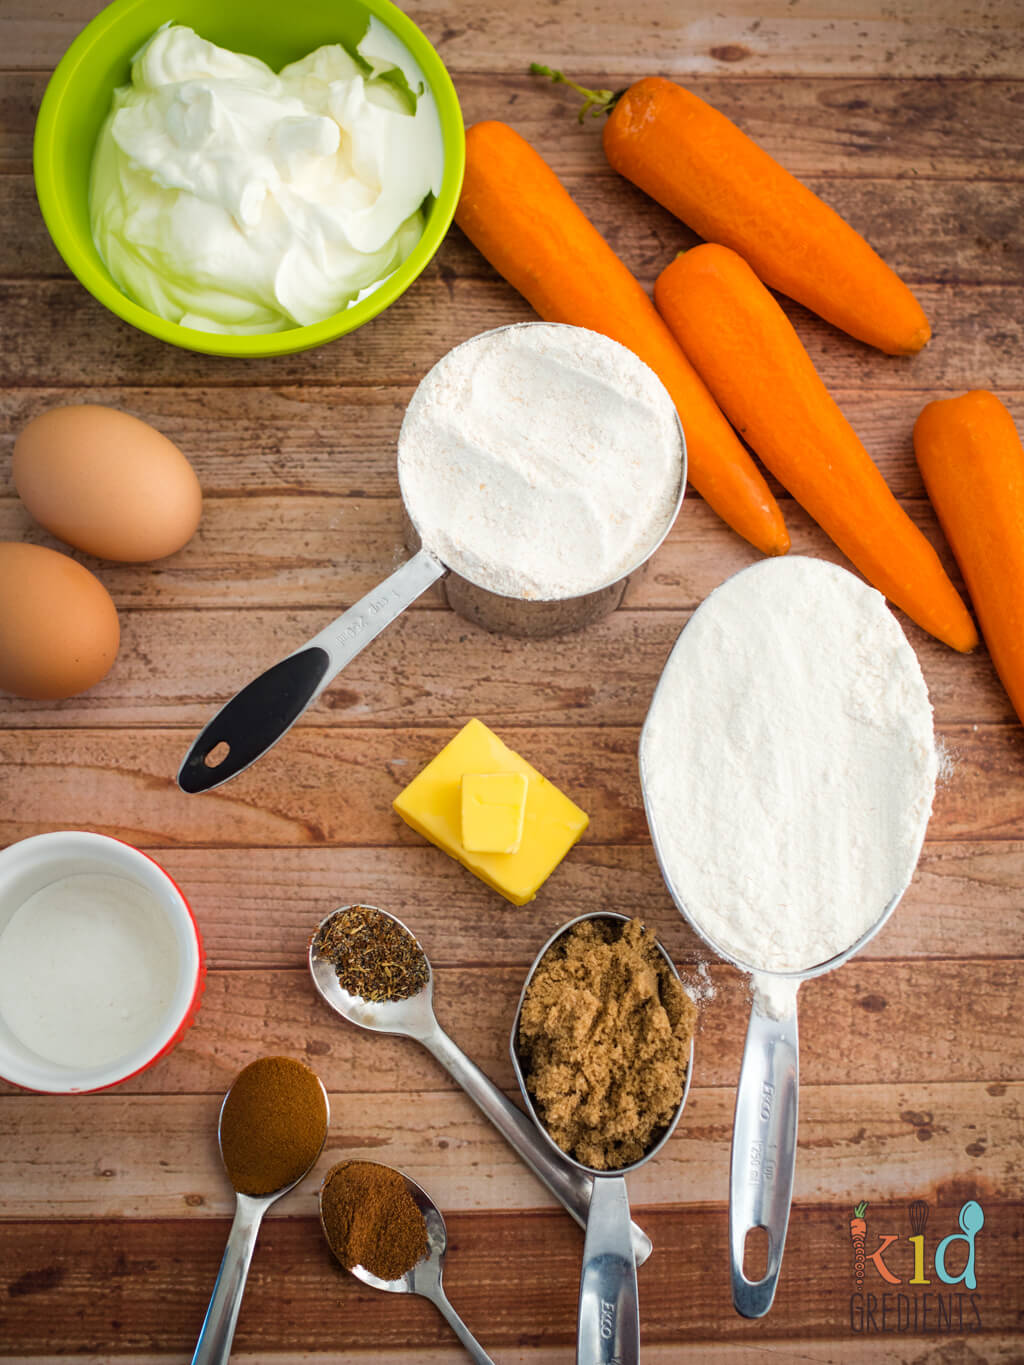 ingredients, flour, eggs, sugar, carrots, butter, spices and yoghurt